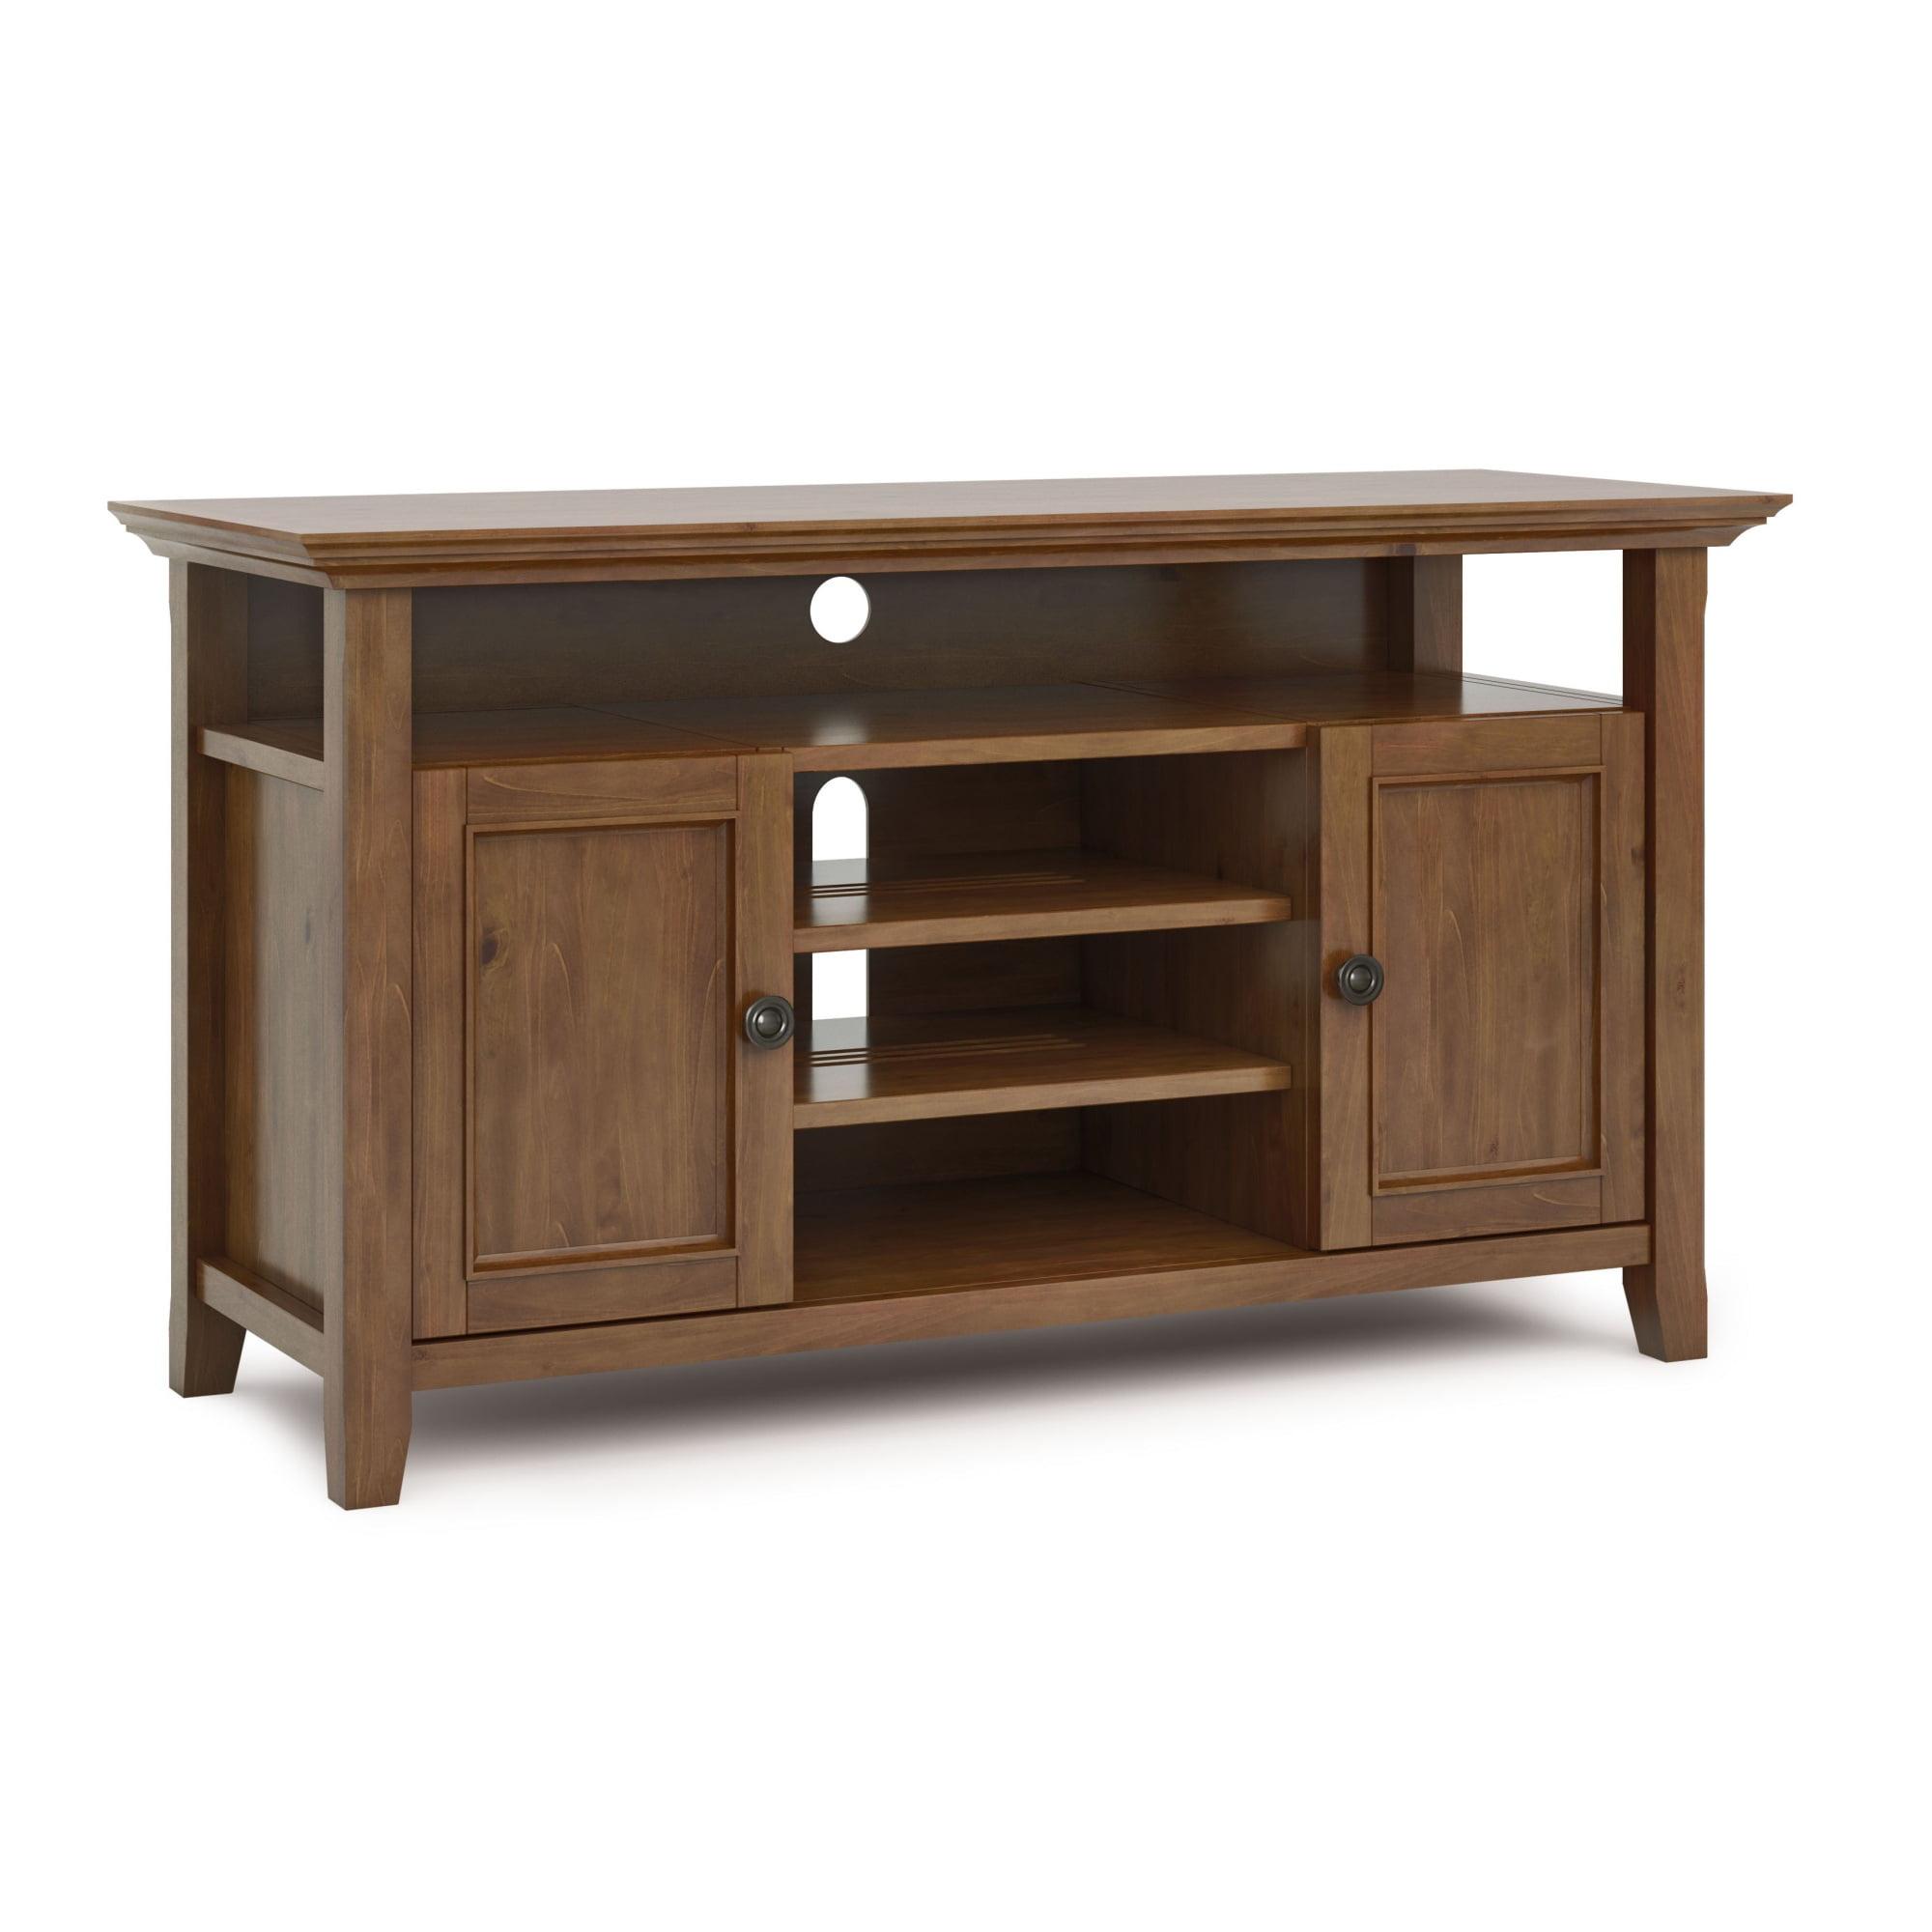 Amherst Transitional 54" Media Stand with Cabinet in Medium Saddle Brown